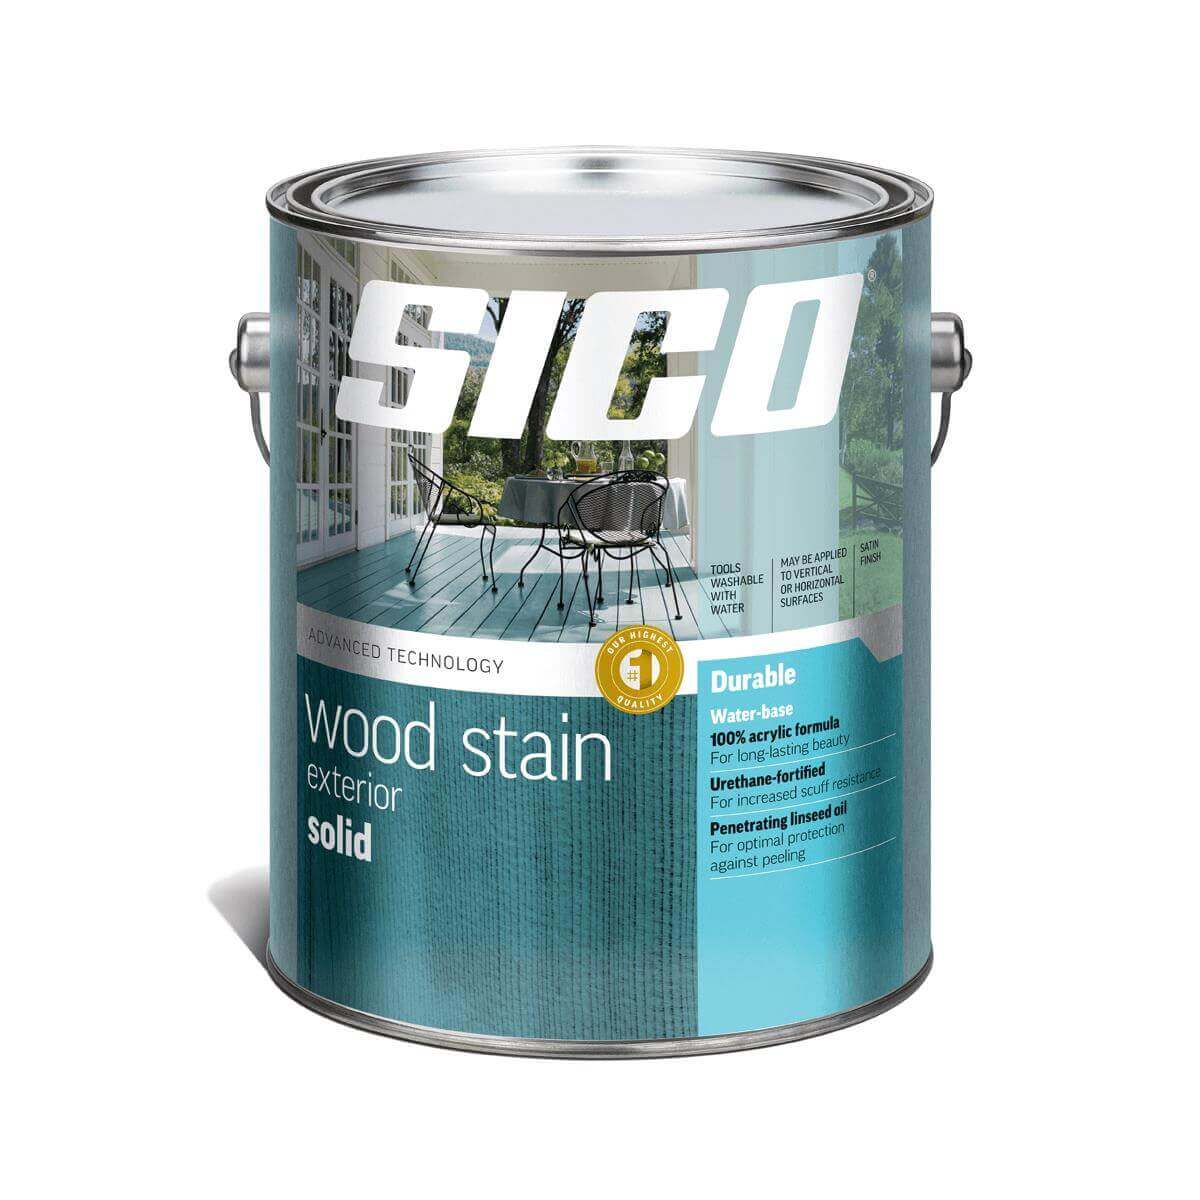 Sico Solid Exterior Stain White - 232-100 - 3.78 L